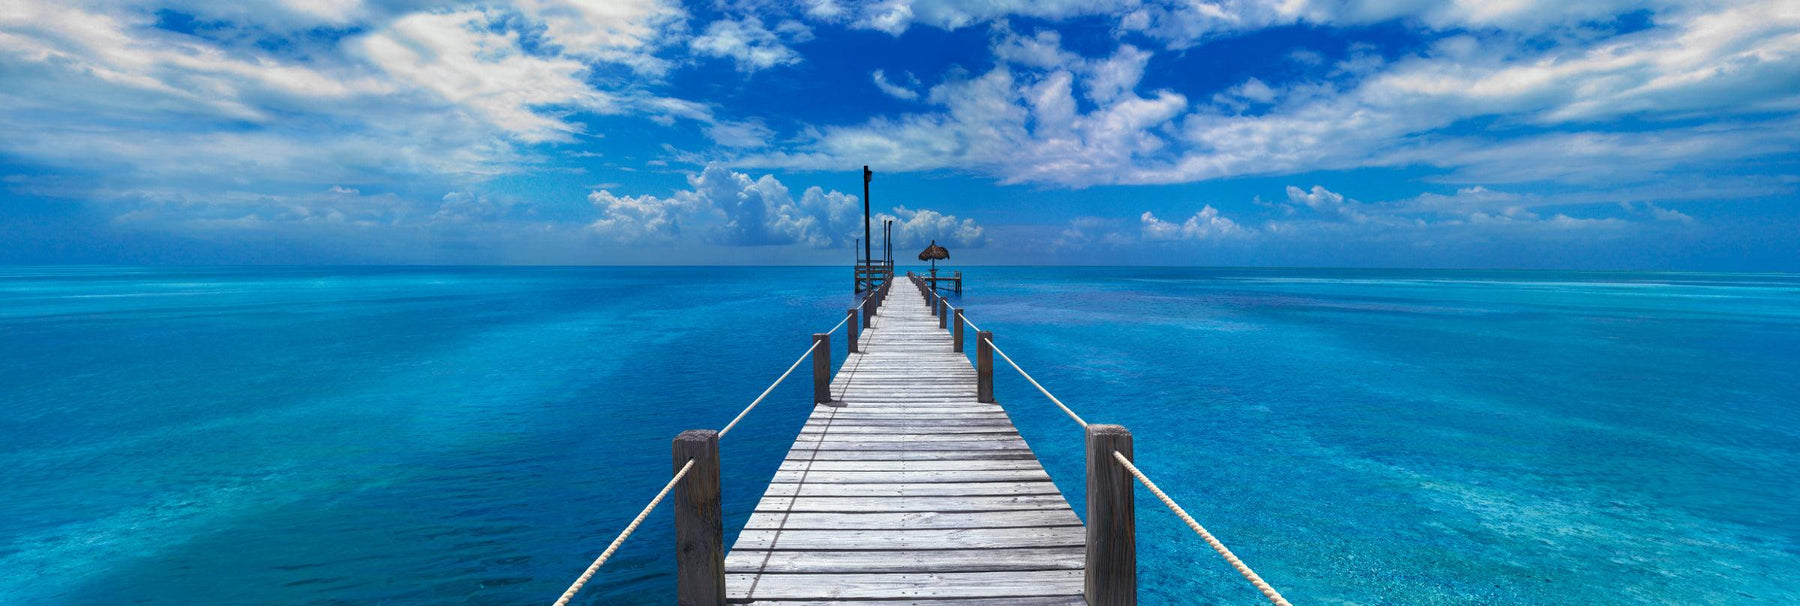 White washed wooden Jetty with rope handrails reaching out over the turquoise ocean in Key West Florida